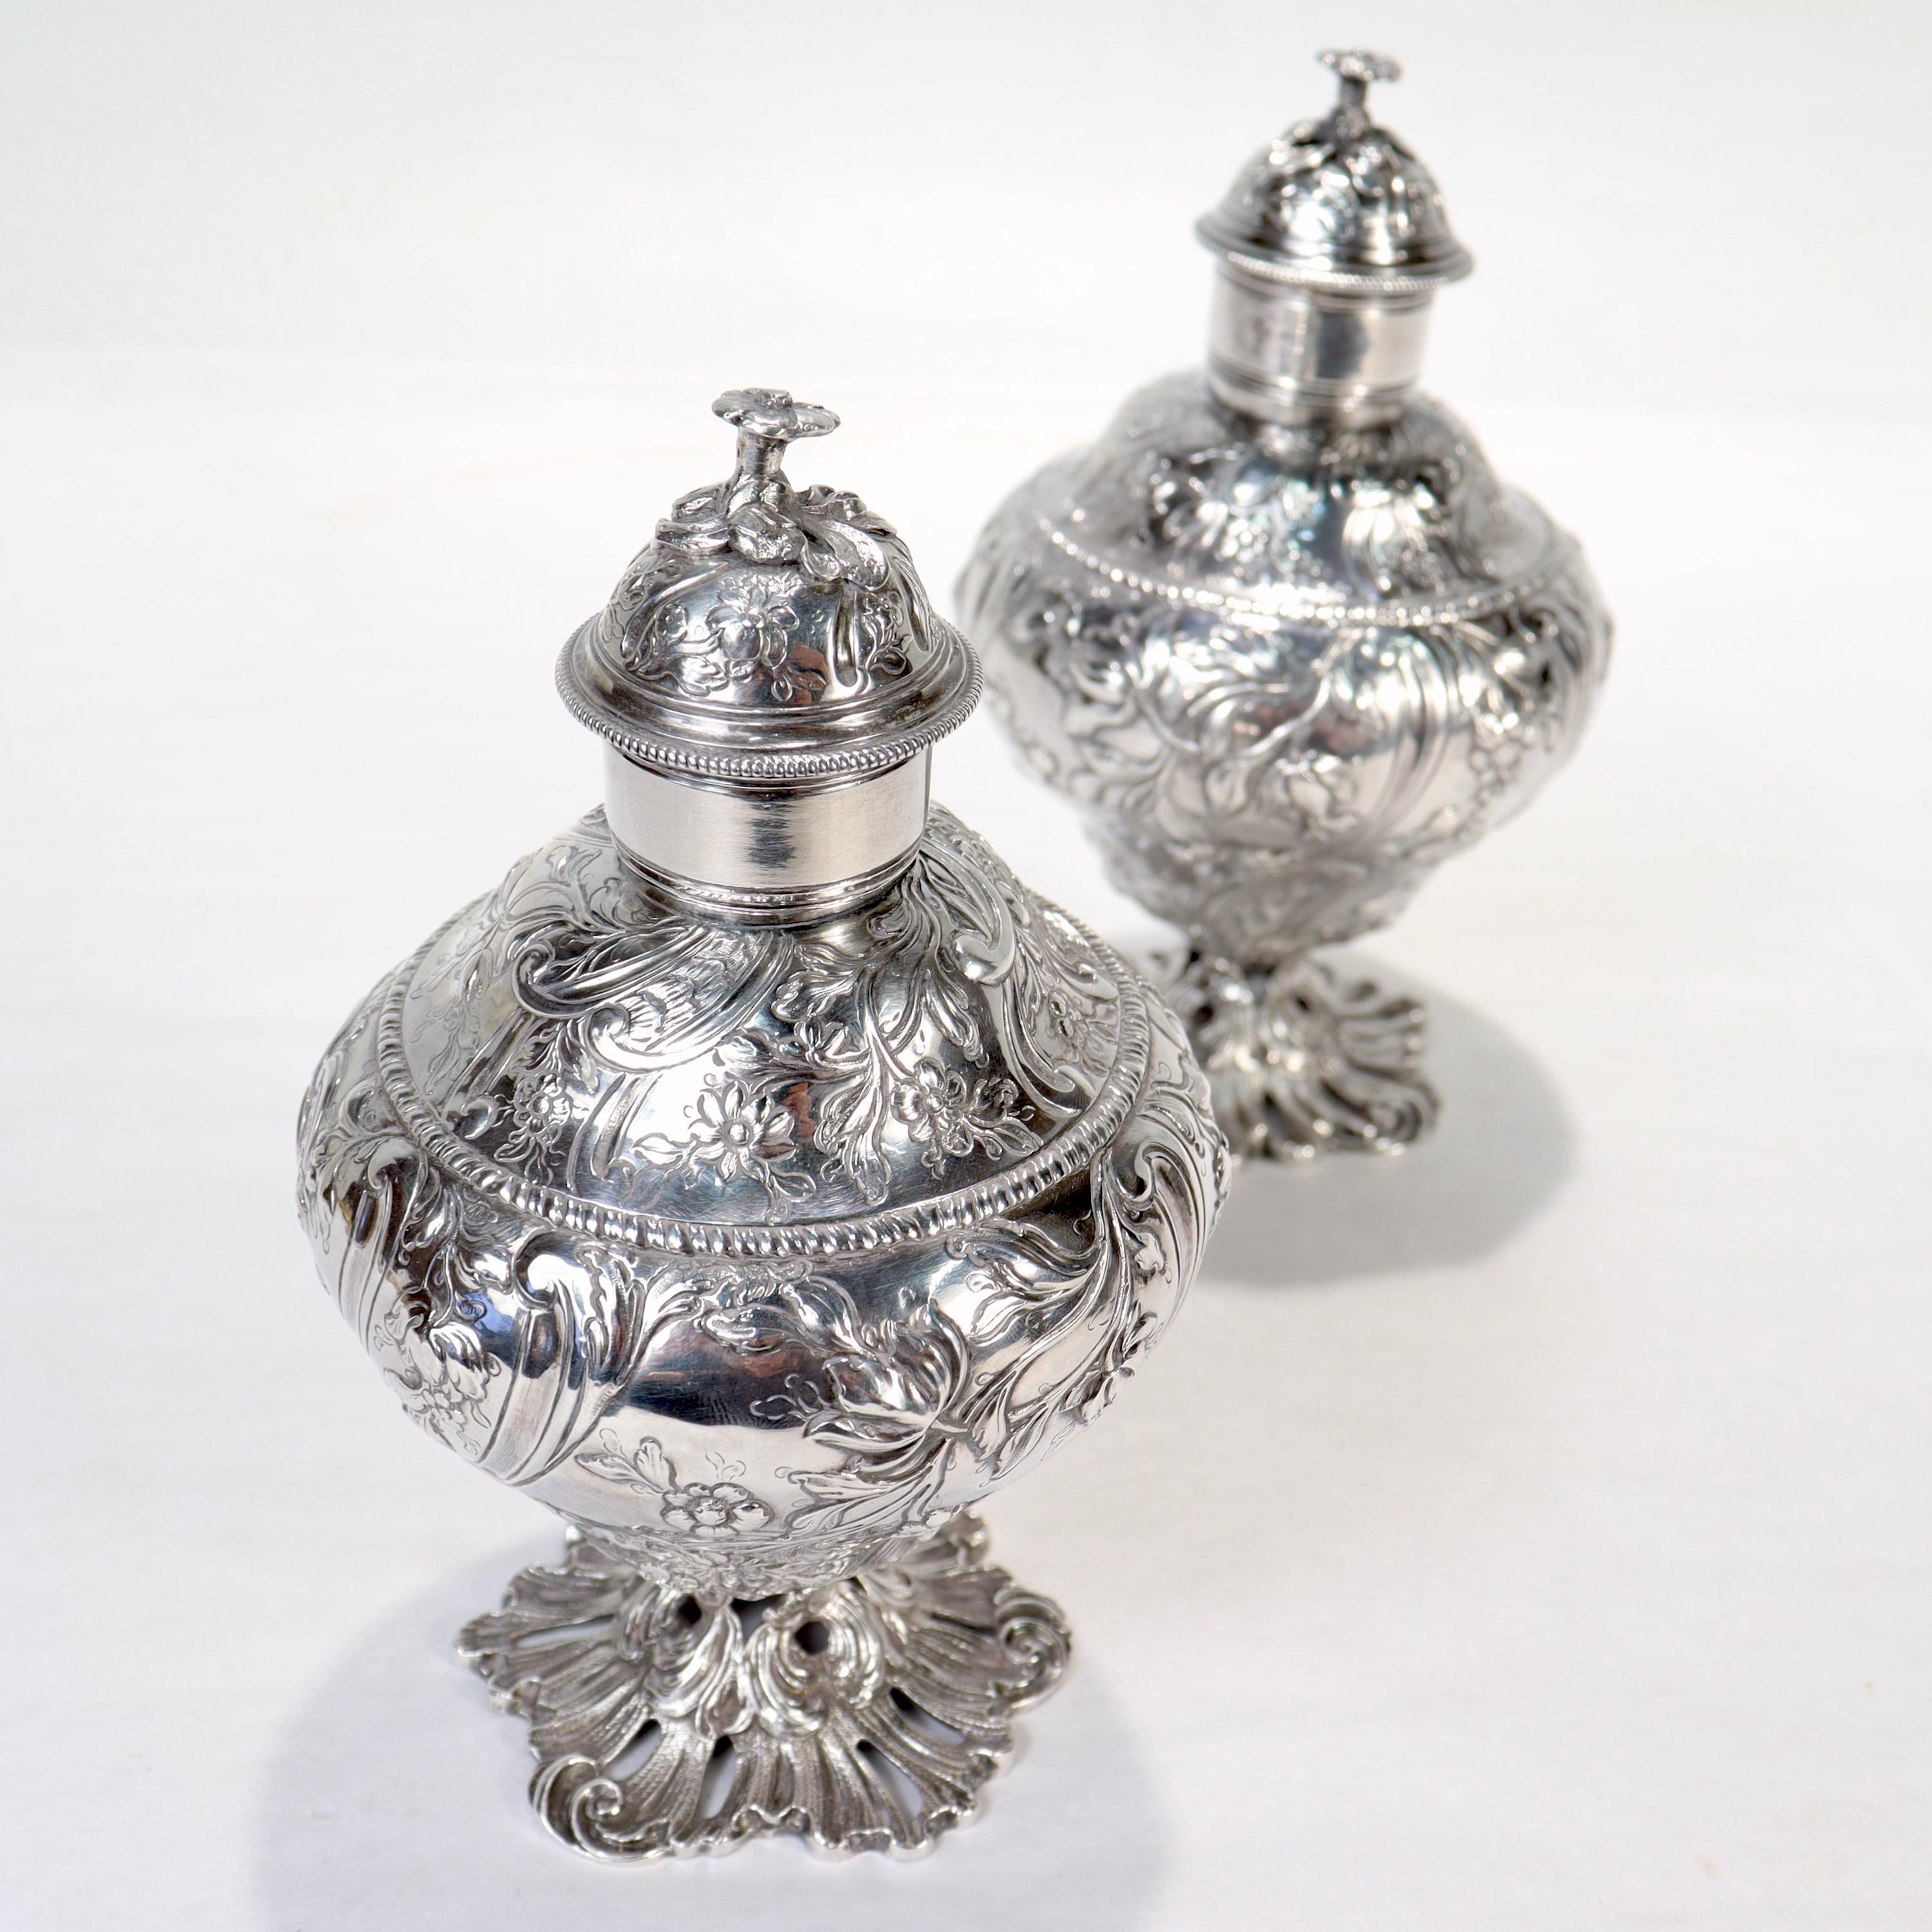 Pair of Antique Georgian English Sterling Silver Tea Caddies by Francis Crump For Sale 11